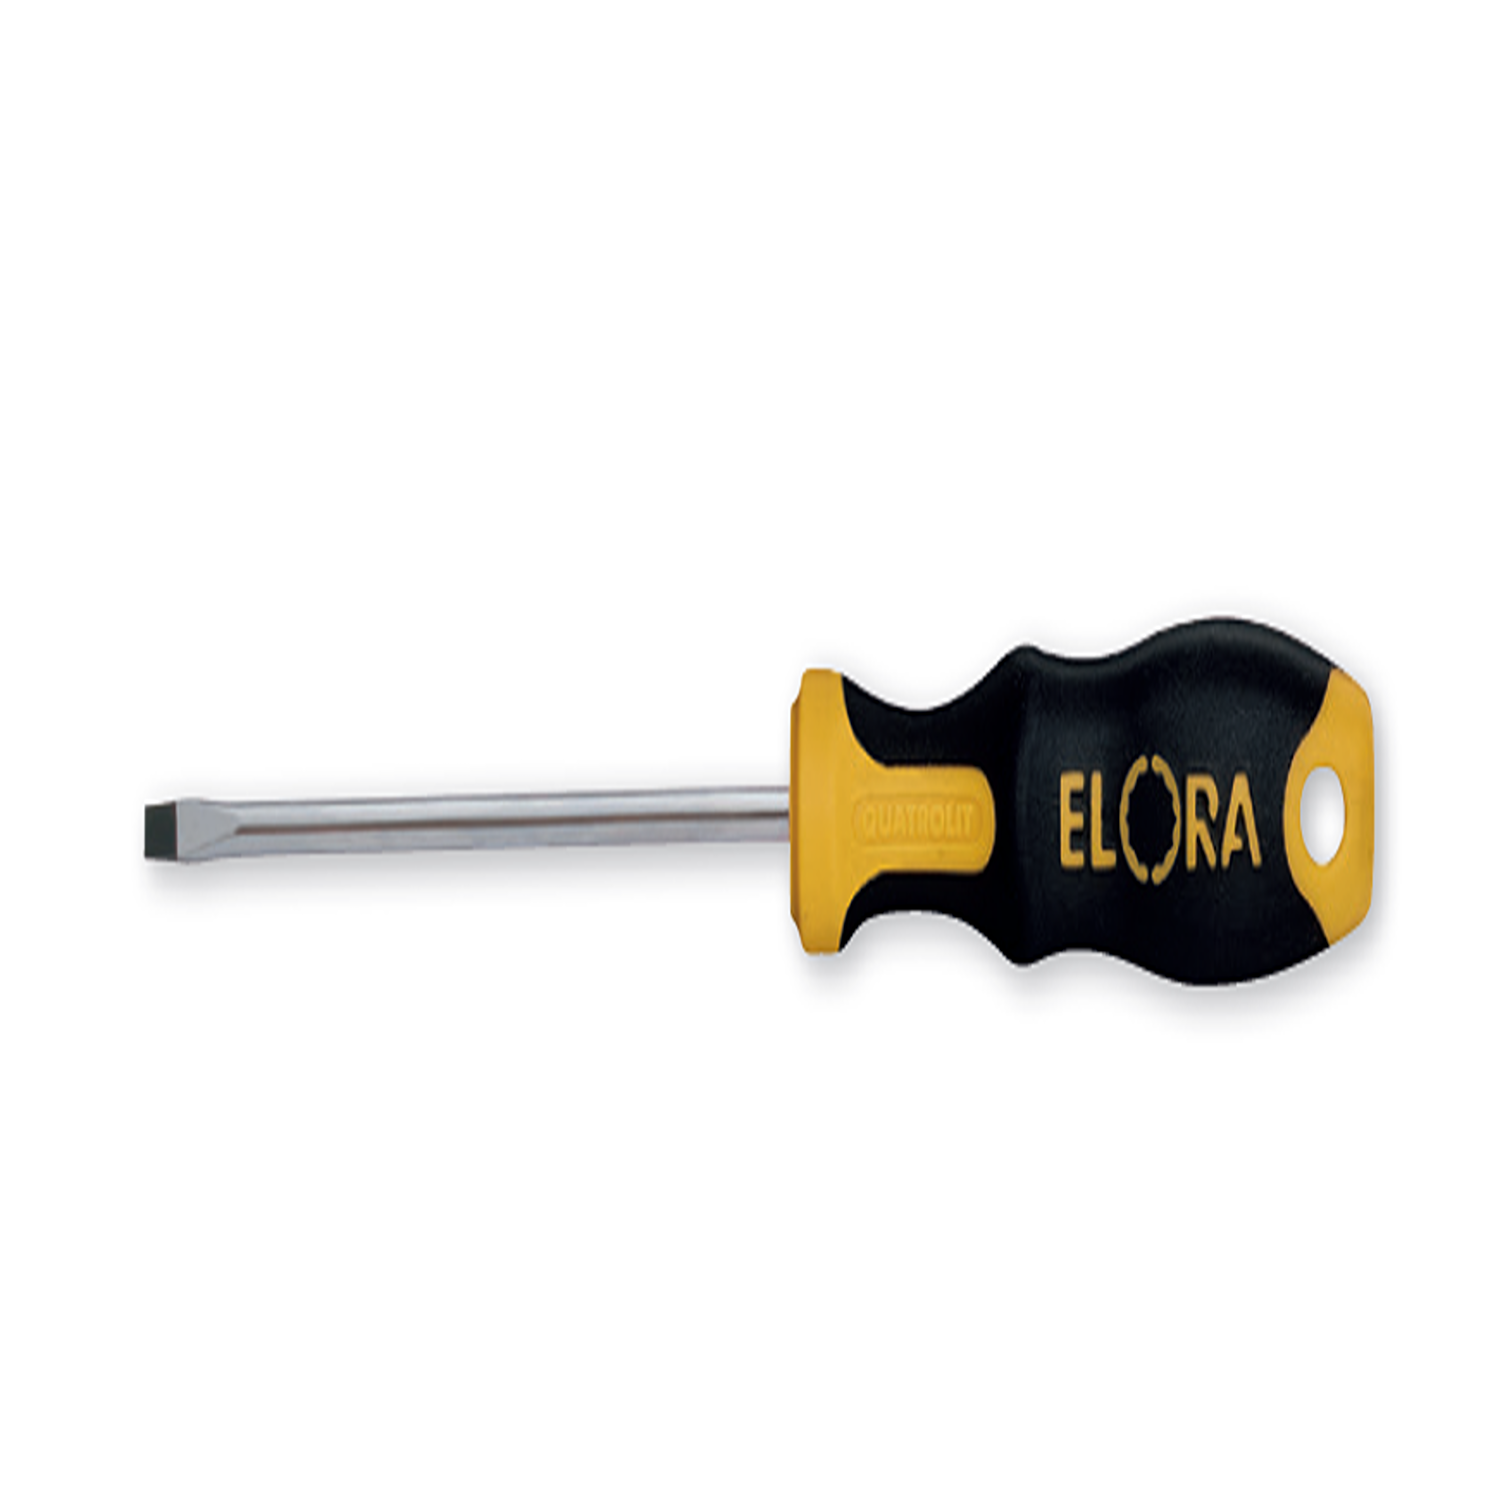 ELORA 545-IS Screwdriver for Plain Slotted Screws (ELORA Tools) - Premium Screwdriver from ELORA - Shop now at Yew Aik.